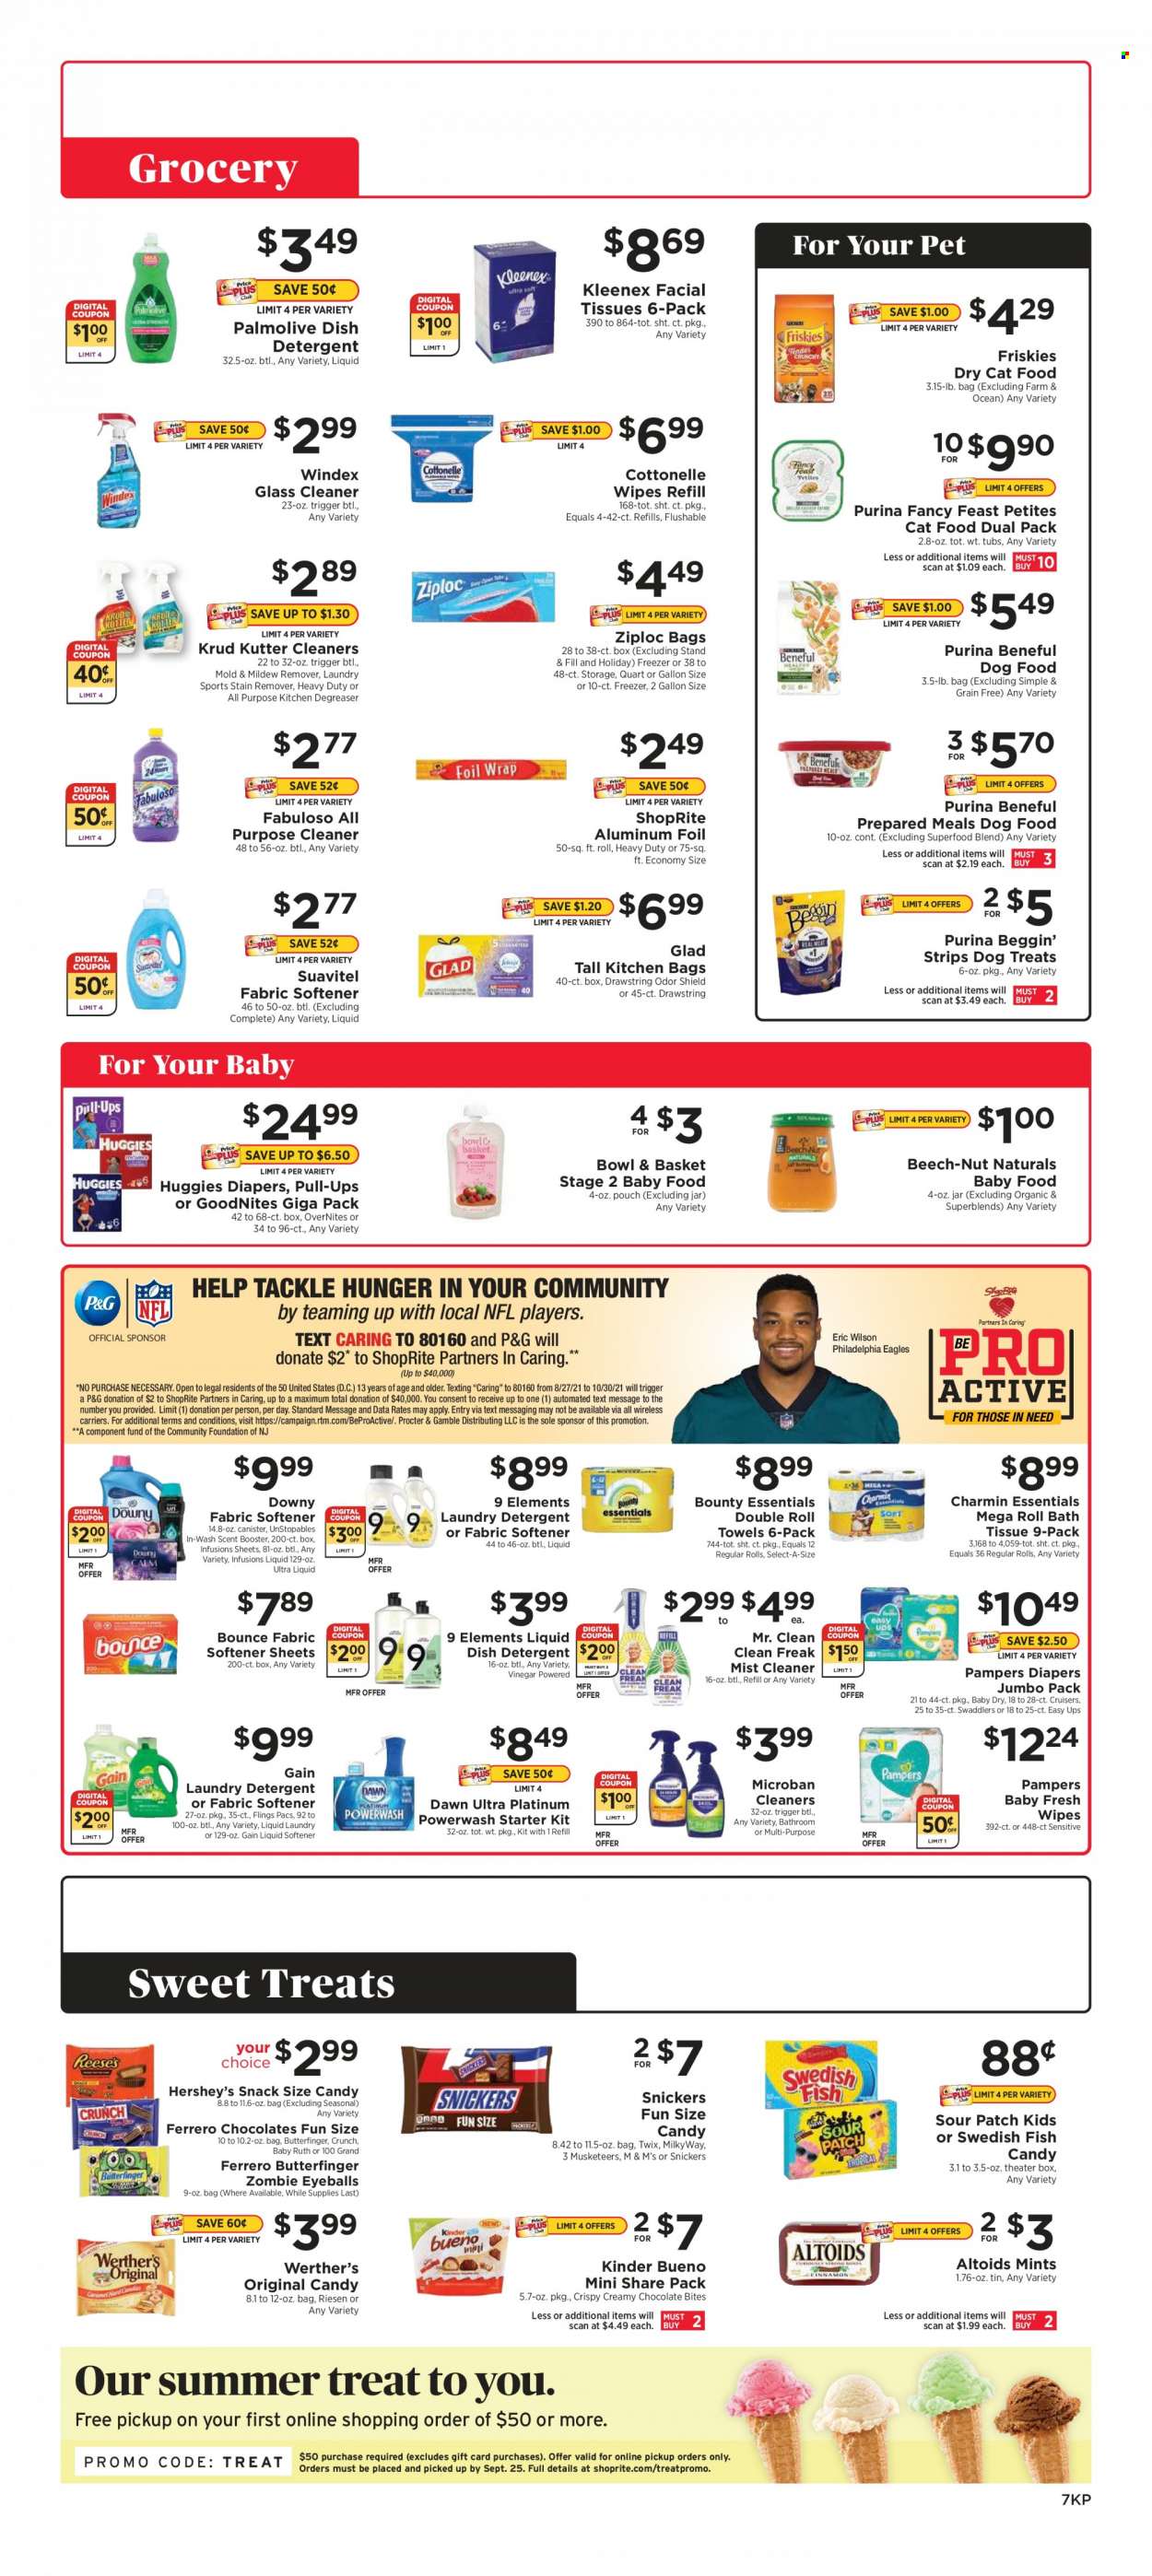 thumbnail - ShopRite Flyer - 09/19/2021 - 09/25/2021 - Sales products - Bowl & Basket, Philadelphia, Hershey's, strips, chocolate, snack, Ferrero Rocher, Snickers, Twix, Bounty, Kinder Bueno, Sour Patch, vinegar, wipes, Huggies, Pampers, nappies, bath tissue, Cottonelle, Kleenex, paper towels, Charmin, detergent, Gain, Windex, cleaner, all purpose cleaner, stain remover, glass cleaner, Fabuloso, Unstopables, fabric softener, laundry detergent, Bounce, Downy Laundry, Palmolive, facial tissues, Ziploc, aluminium foil, animal food, cat food, dog food, Purina, dry cat food, Beggin', Fancy Feast, Friskies, Wilson. Page 7.